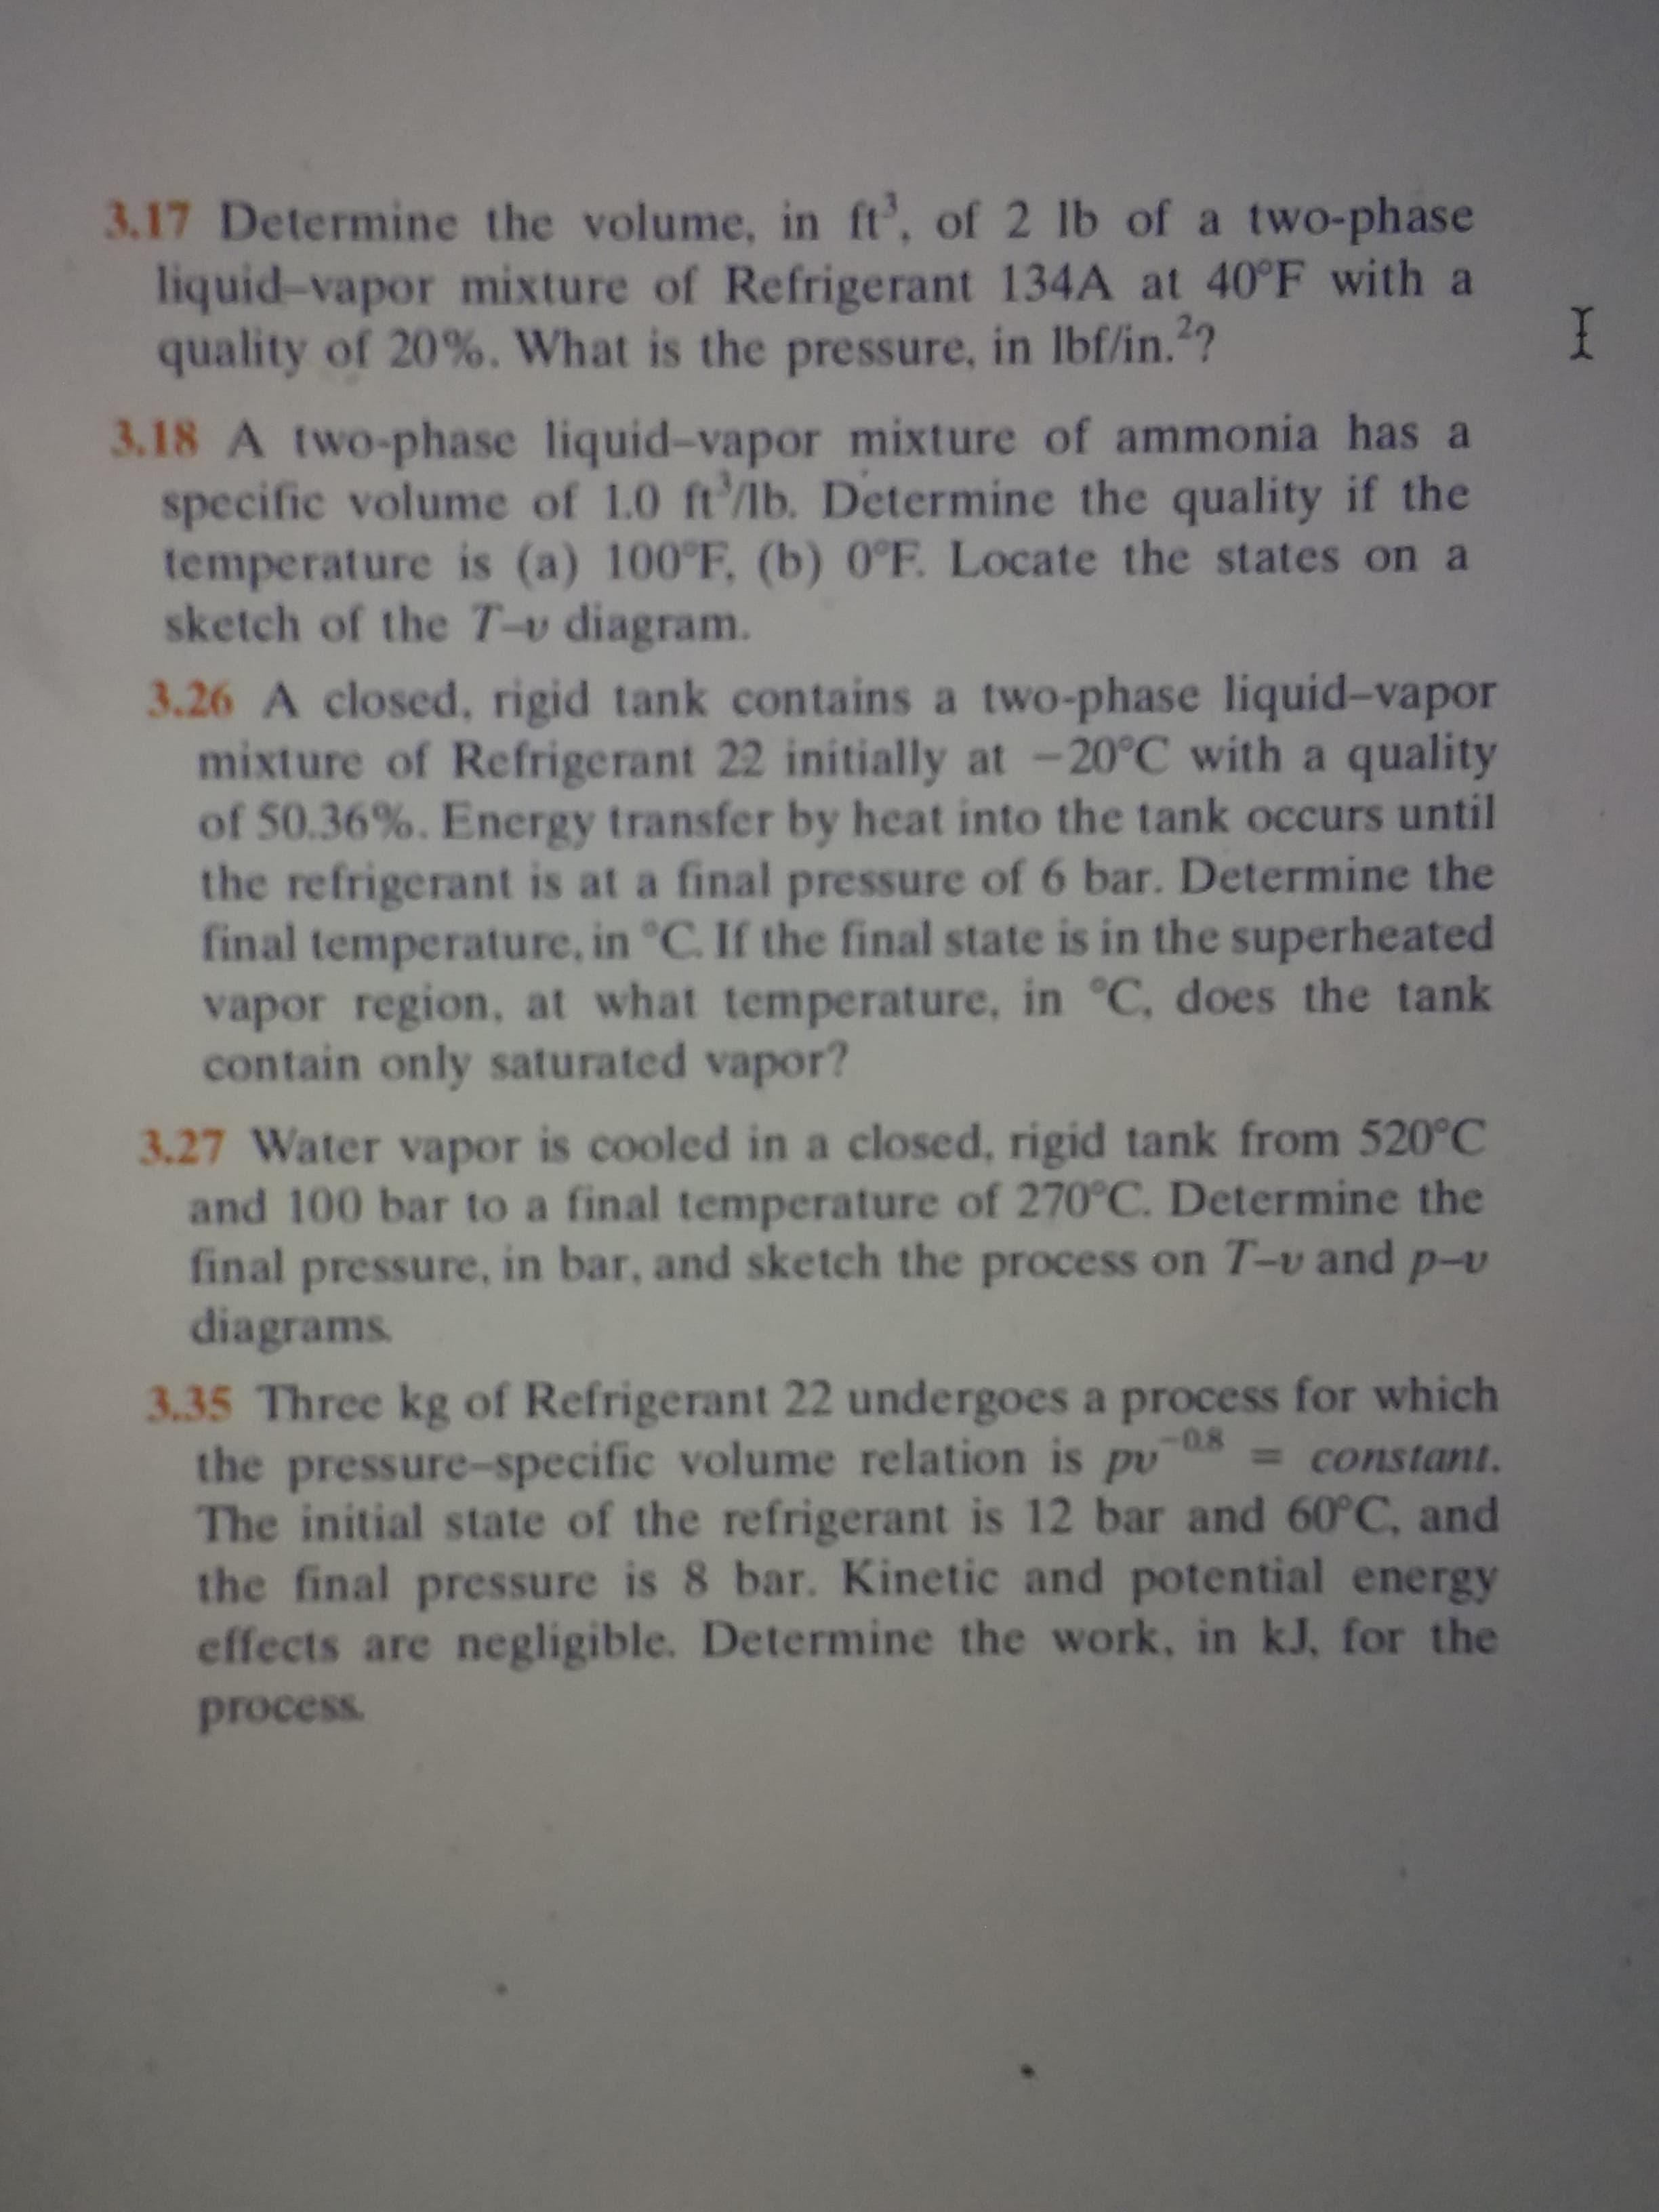 3.17 Determine the volume, in ft', of 2 lb of a two-phase
liquid-vapor mixture of Refrigerant 134A at 40°F with a
quality of 20%. What is the pressure, in Ibf/in.?
I
3.18 A two-phase liquid-vapor mixture of ammonia has a
specific volume of 1.0 ft'/lb. Determine the quality if the
temperature is (a) 100°F, (b) 0°F. Locate the states on a
sketch of the T-v diagram.
3.26 A closed, rigid tank contains a two-phase liquid-vapor
mixture of Refrigerant 22 initially at -20°C with a quality
of 50.36%. Energy transfer by heat into the tank occurs until
the refrigerant is at a final pressure of 6 bar. Determine the
final temperature, in °C. If the final state is in the superheated
vapor region, at what temperature, in °C, does the tank
contain only saturated vapor?
3.27 Water vapor is cooled in a closed, rigid tank from 520°C
and 100 bar to a final temperature of 270C. Determine the
final pressure, in bar, and sketch the process on T-v and p-v
diagrams
3.35 Three kg of Refrigerant 22 undergoes a process for which
the pressure-specific volume relation is pv
The initial state of the refrigerant is 12 bar and 60°C, and
the final pressure is 8 bar. Kinetic and potential energy
effects are negligible. Determine the work, in kJ, for the
-0.8
= constant.
process
